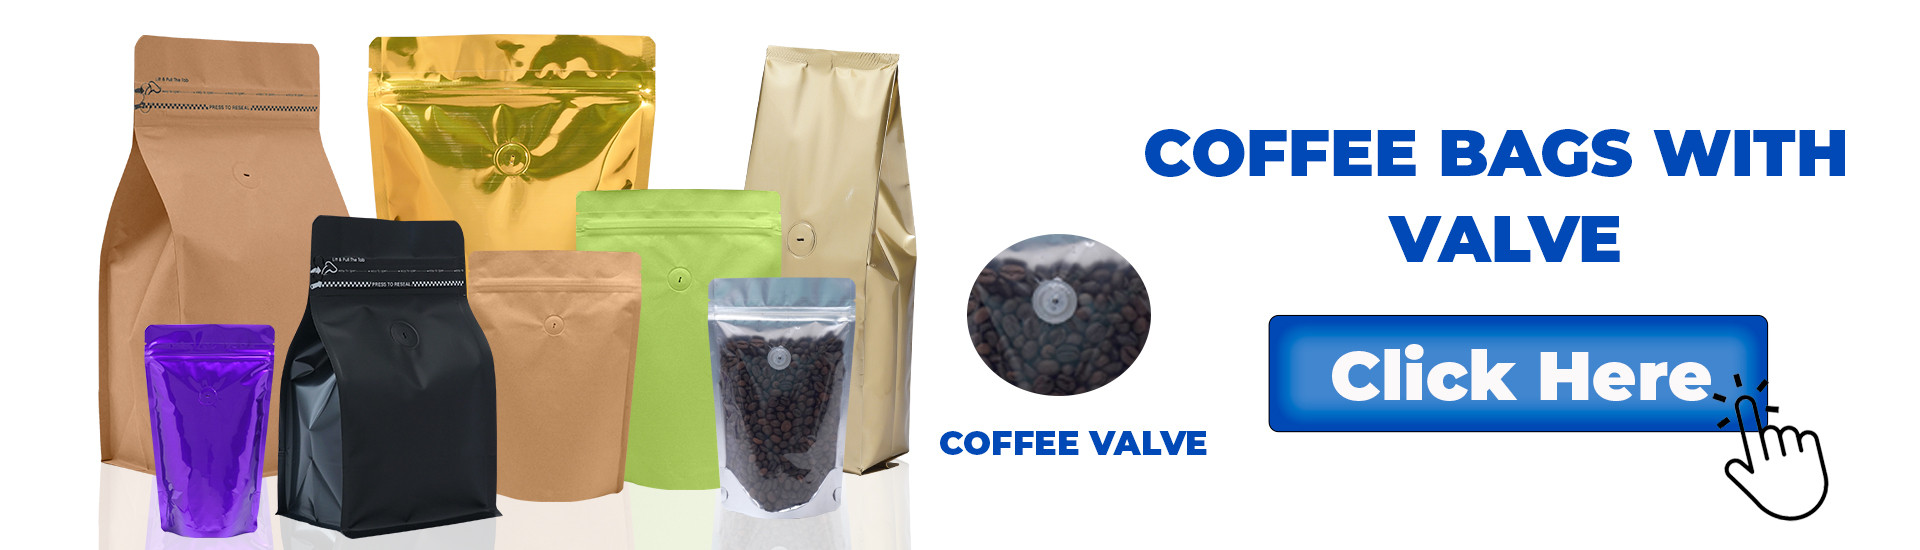 coffee bags with valve